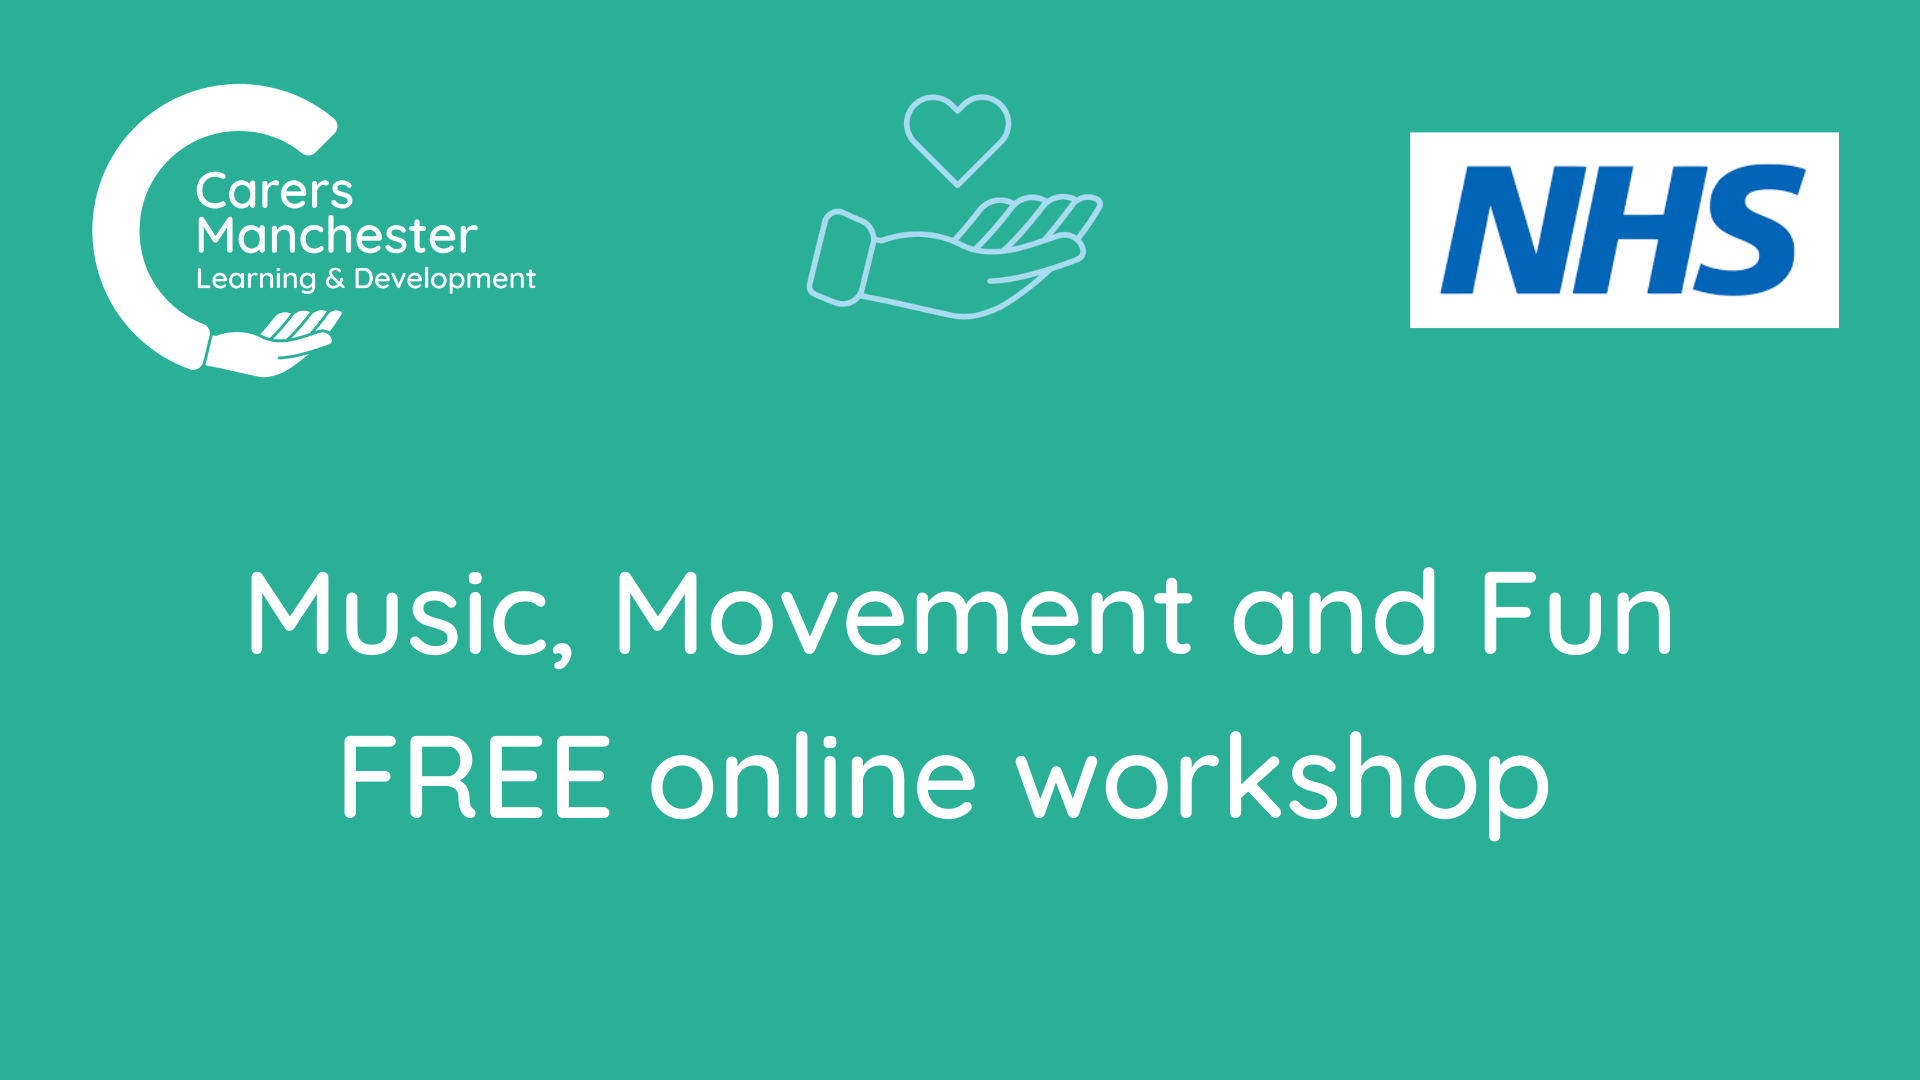 Music, Movement and Fun workshop